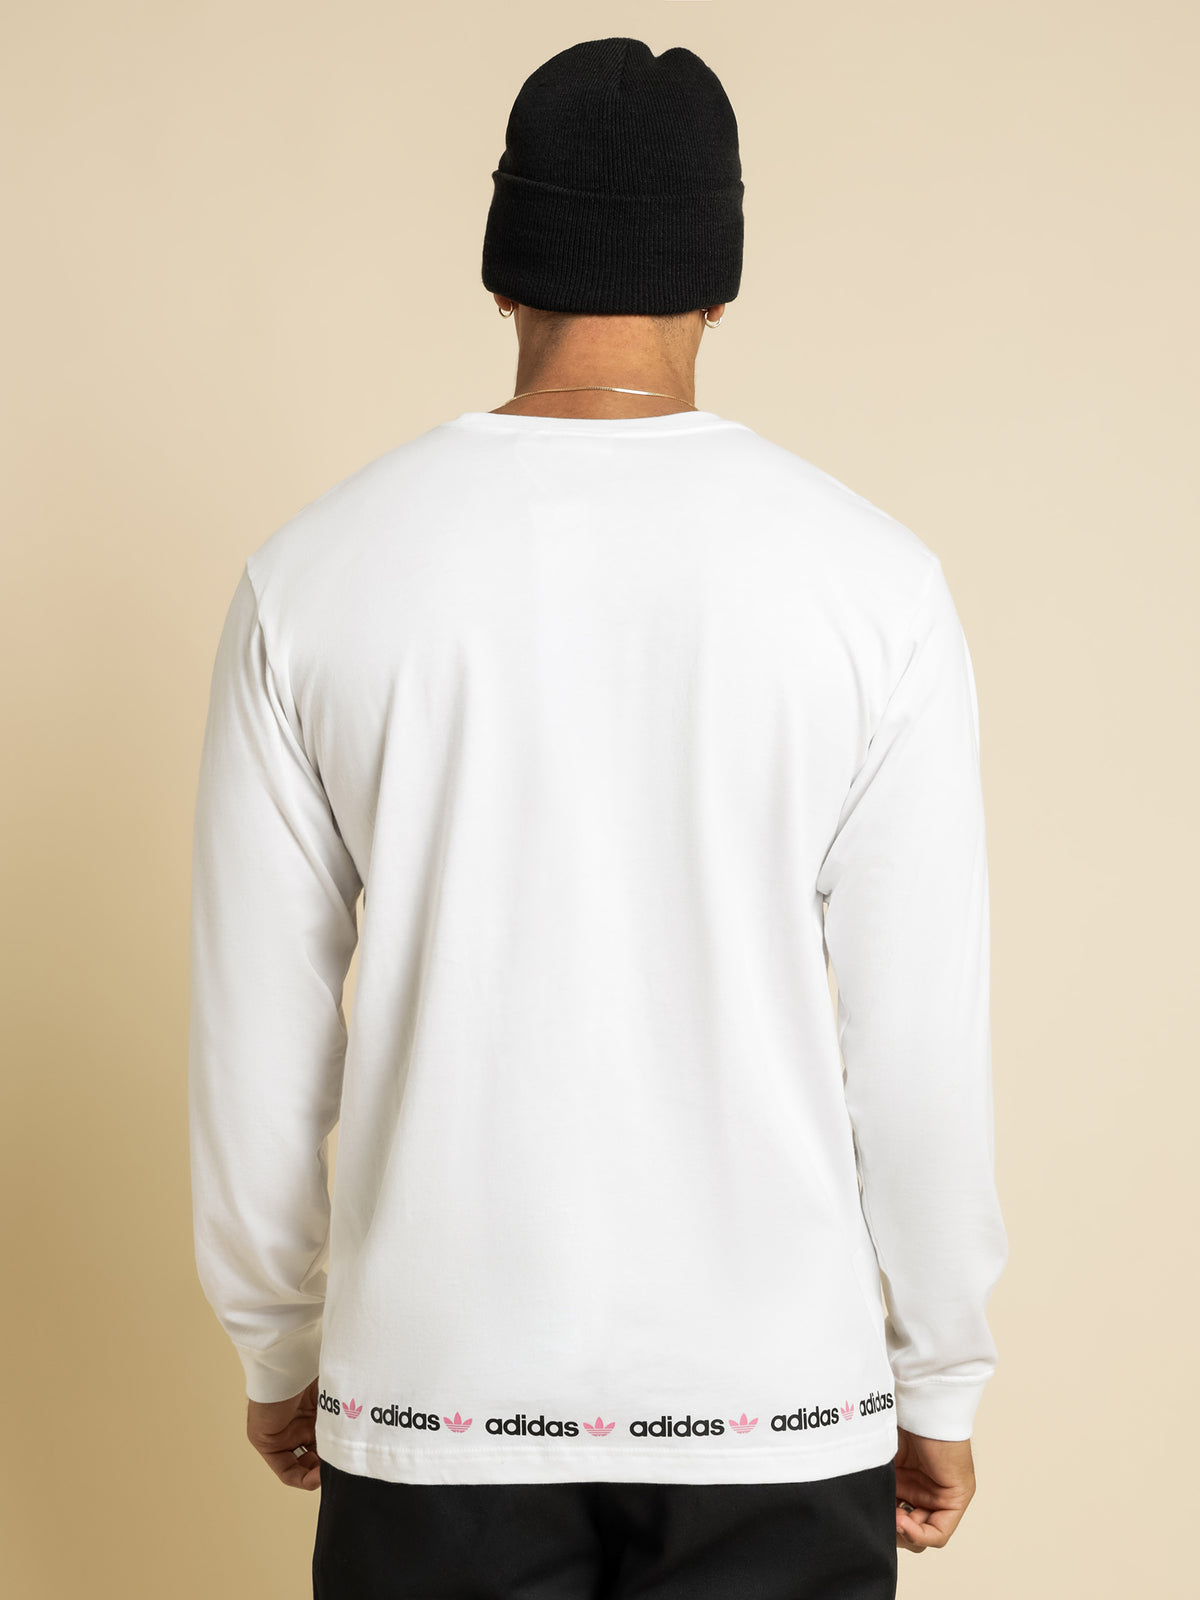 Linear Repeat Long Sleeve T-Shirt in White